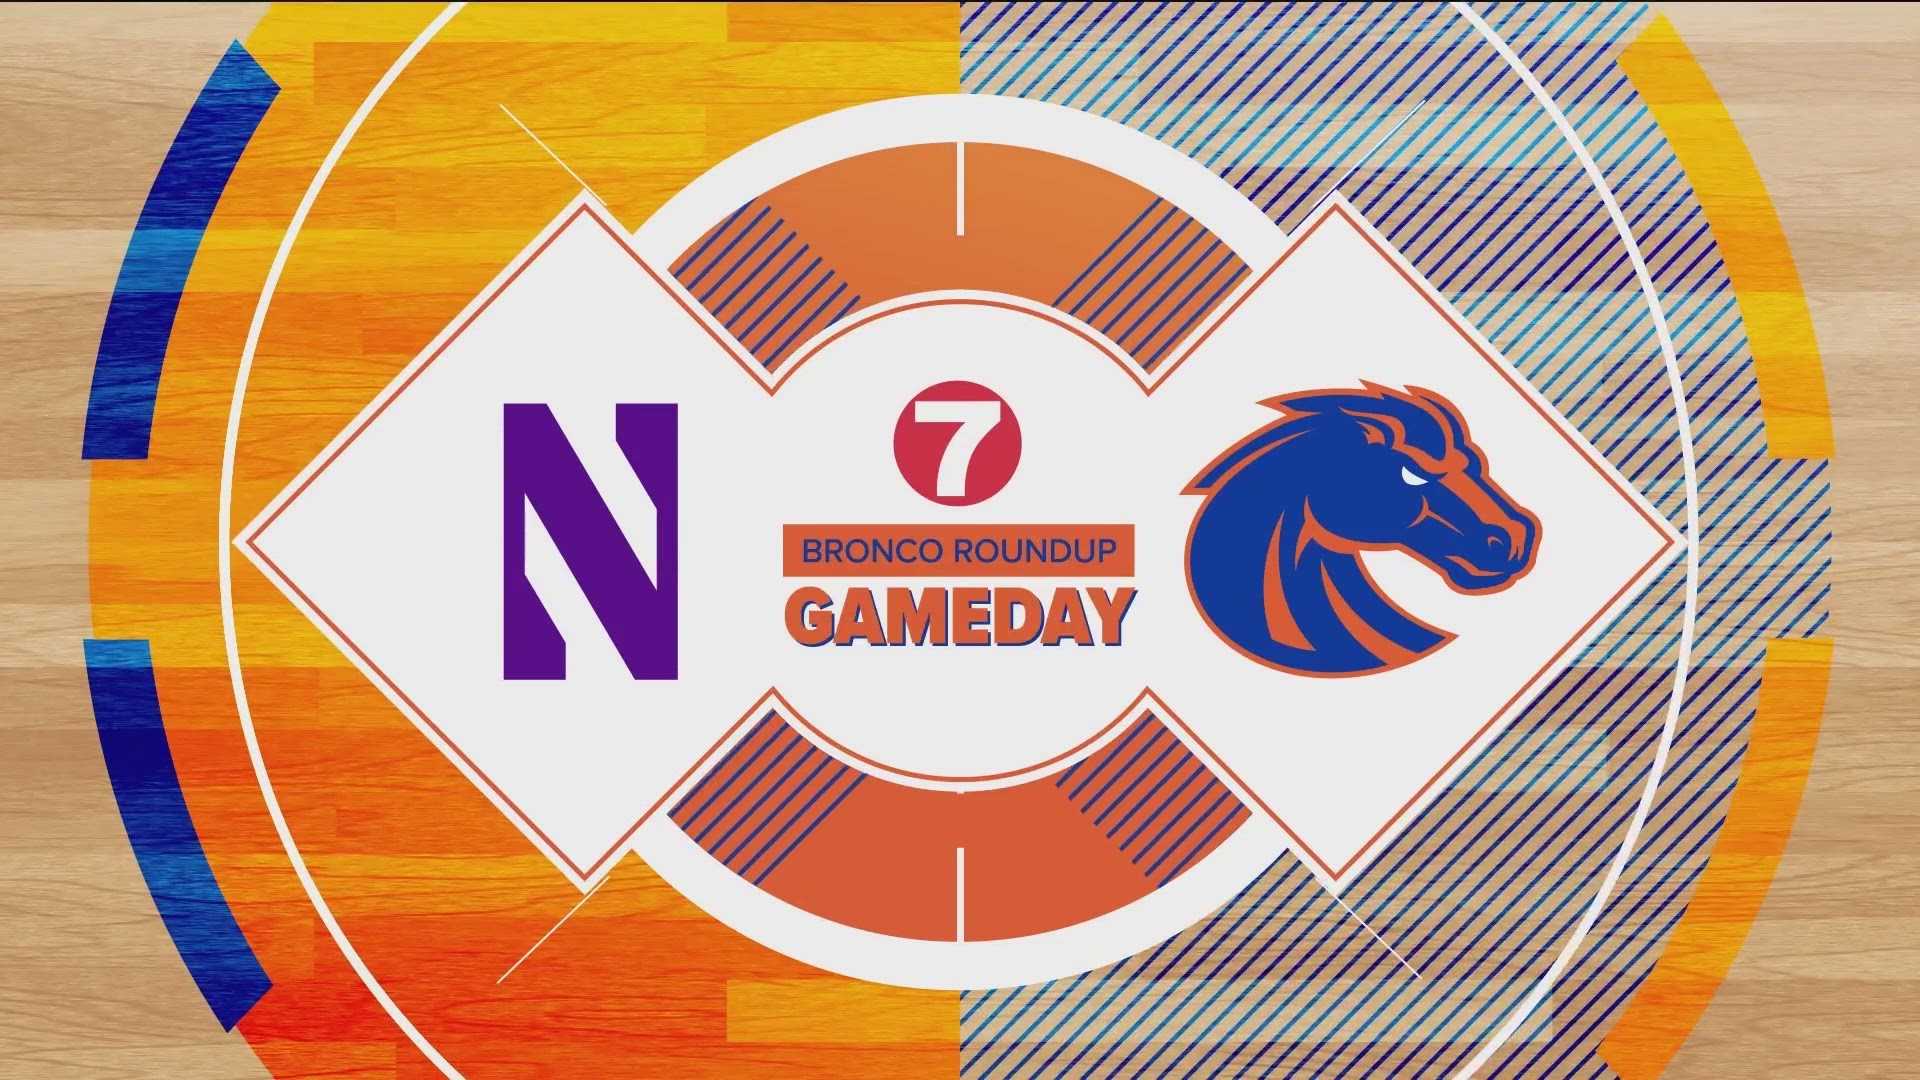 Watch KTVB's Bronco Roundup Game Day Show Thursday at 4:30 p.m.